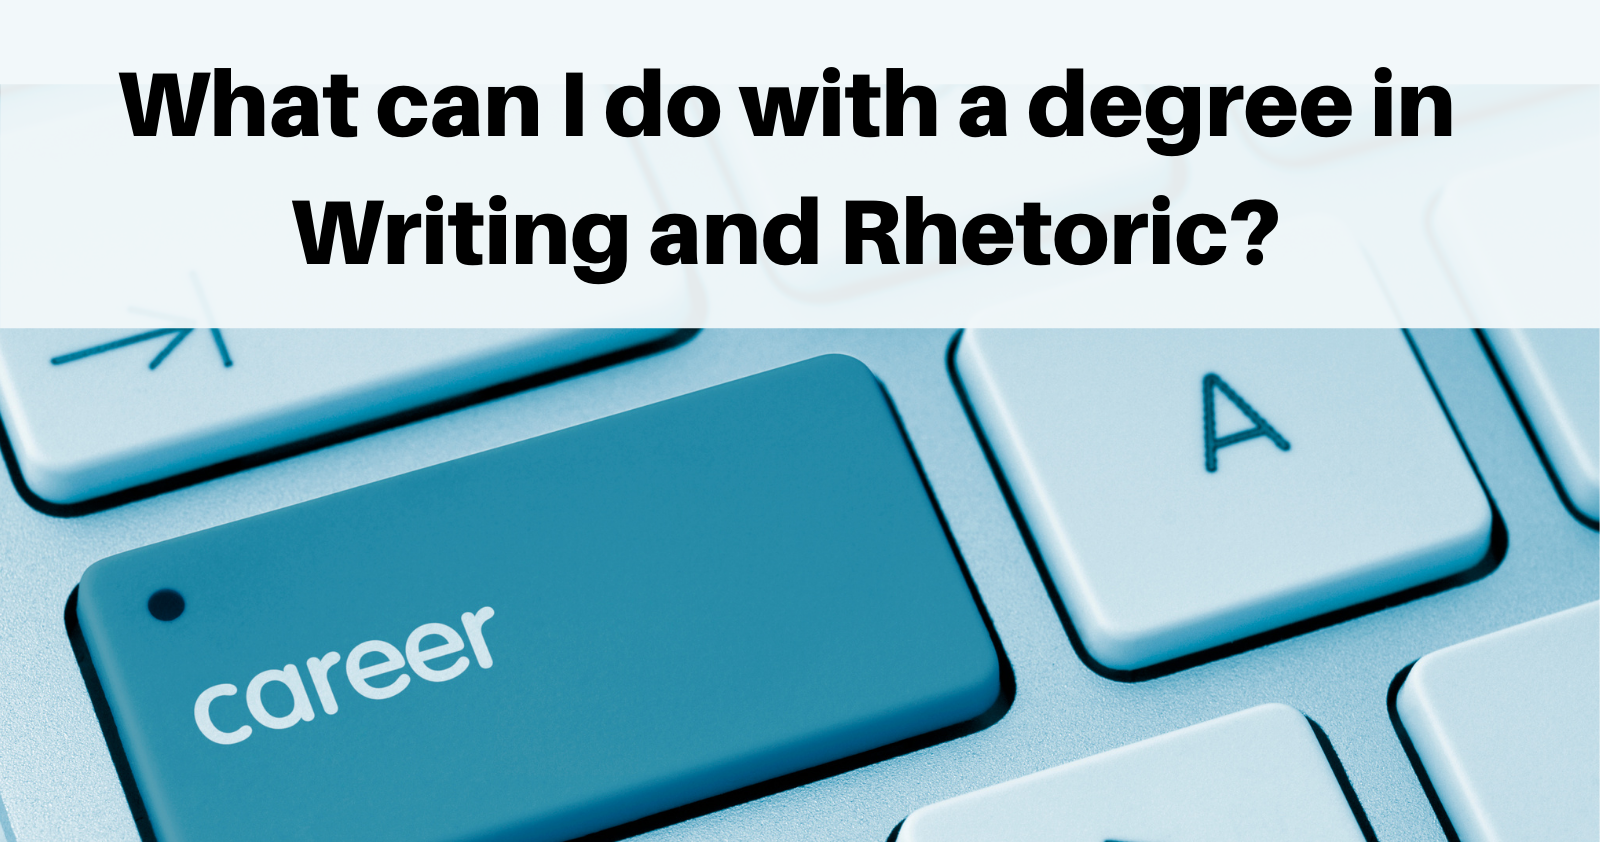 Careers with a WRD Degree